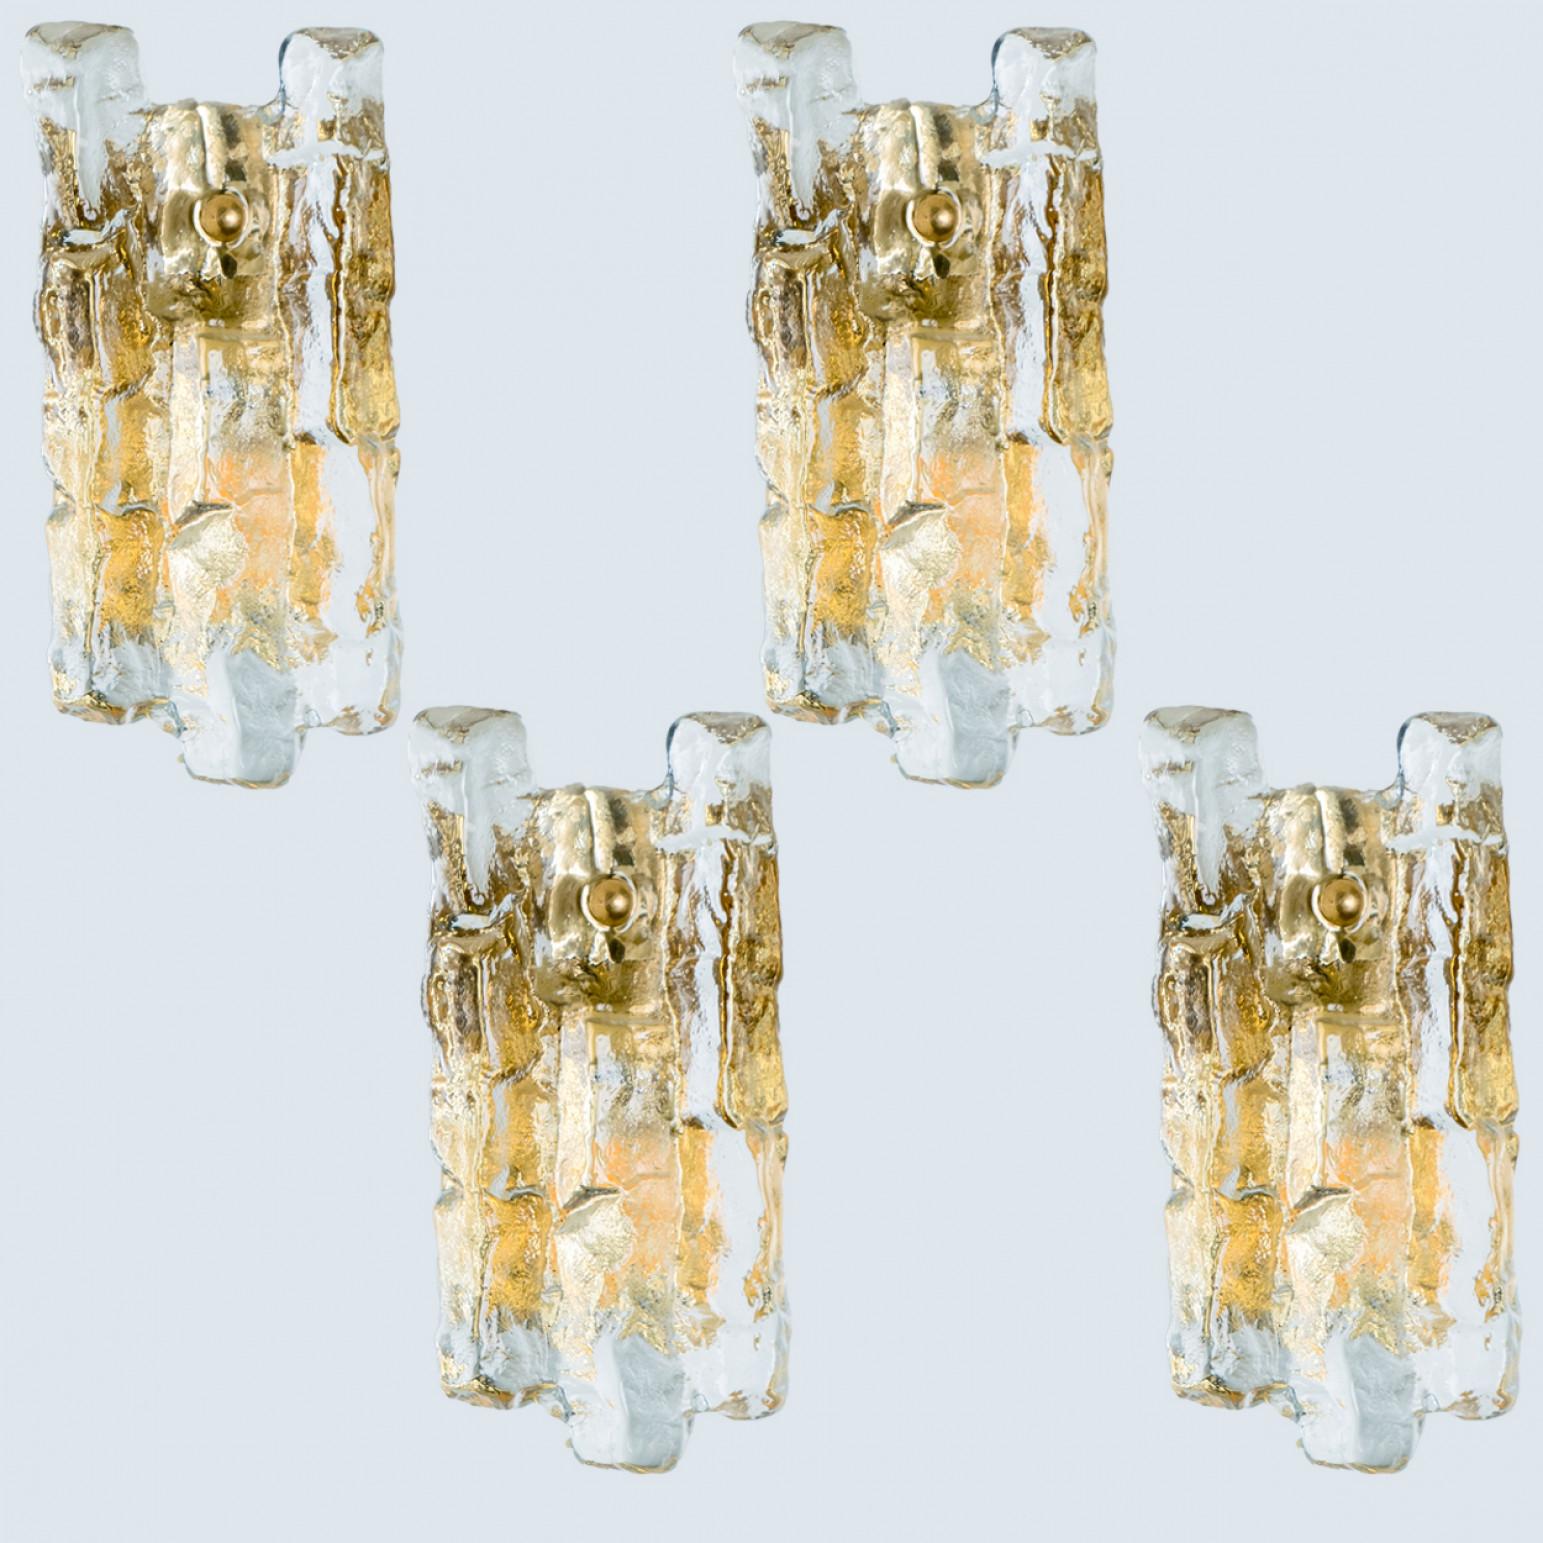 Textured Ice glass Gold Wall Lights Kalmar, 1970s For Sale 8